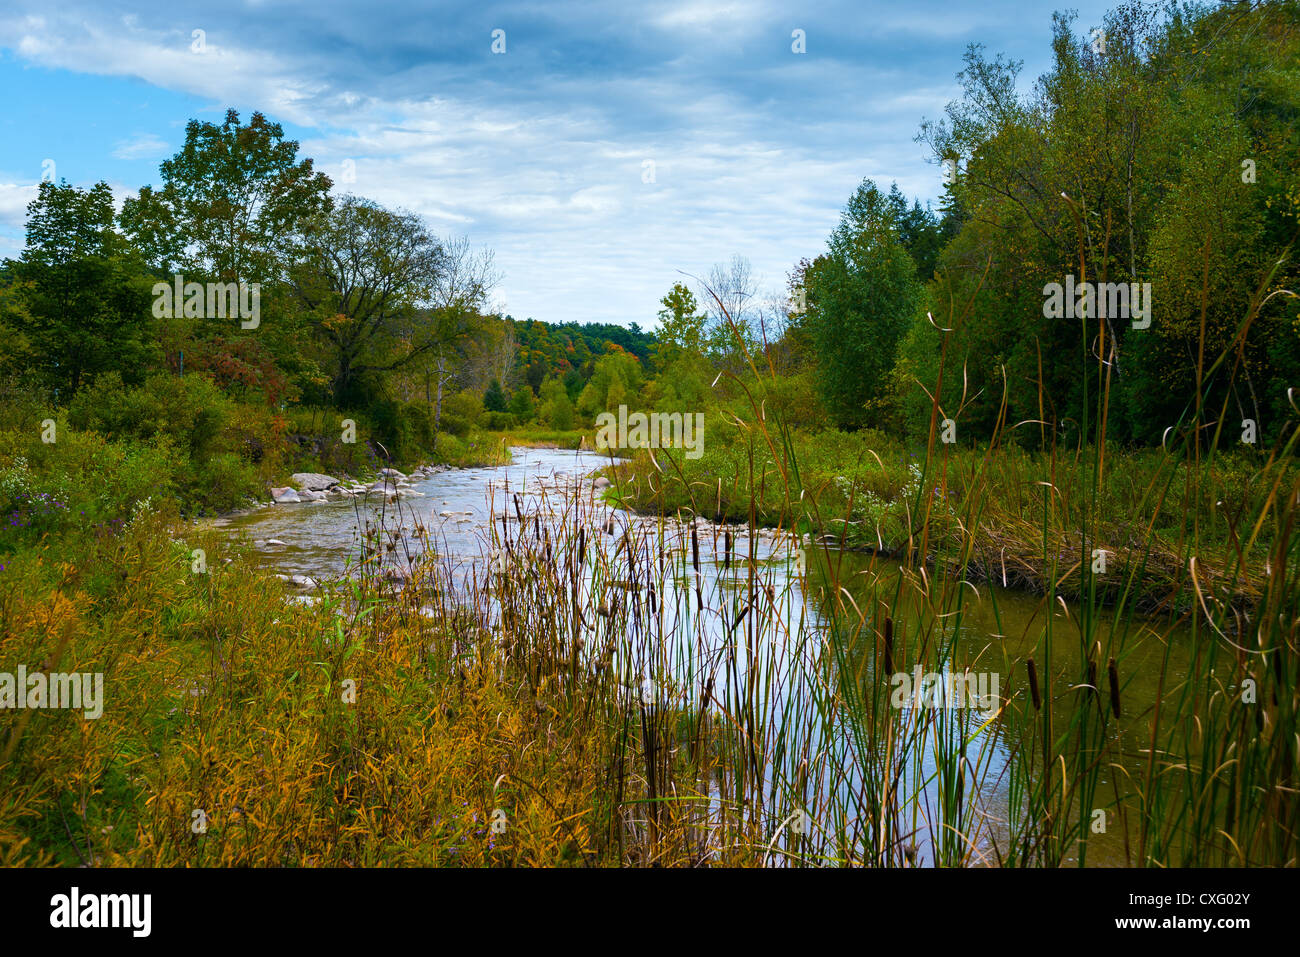 This is a landscape image taken in the fall. Stock Photo